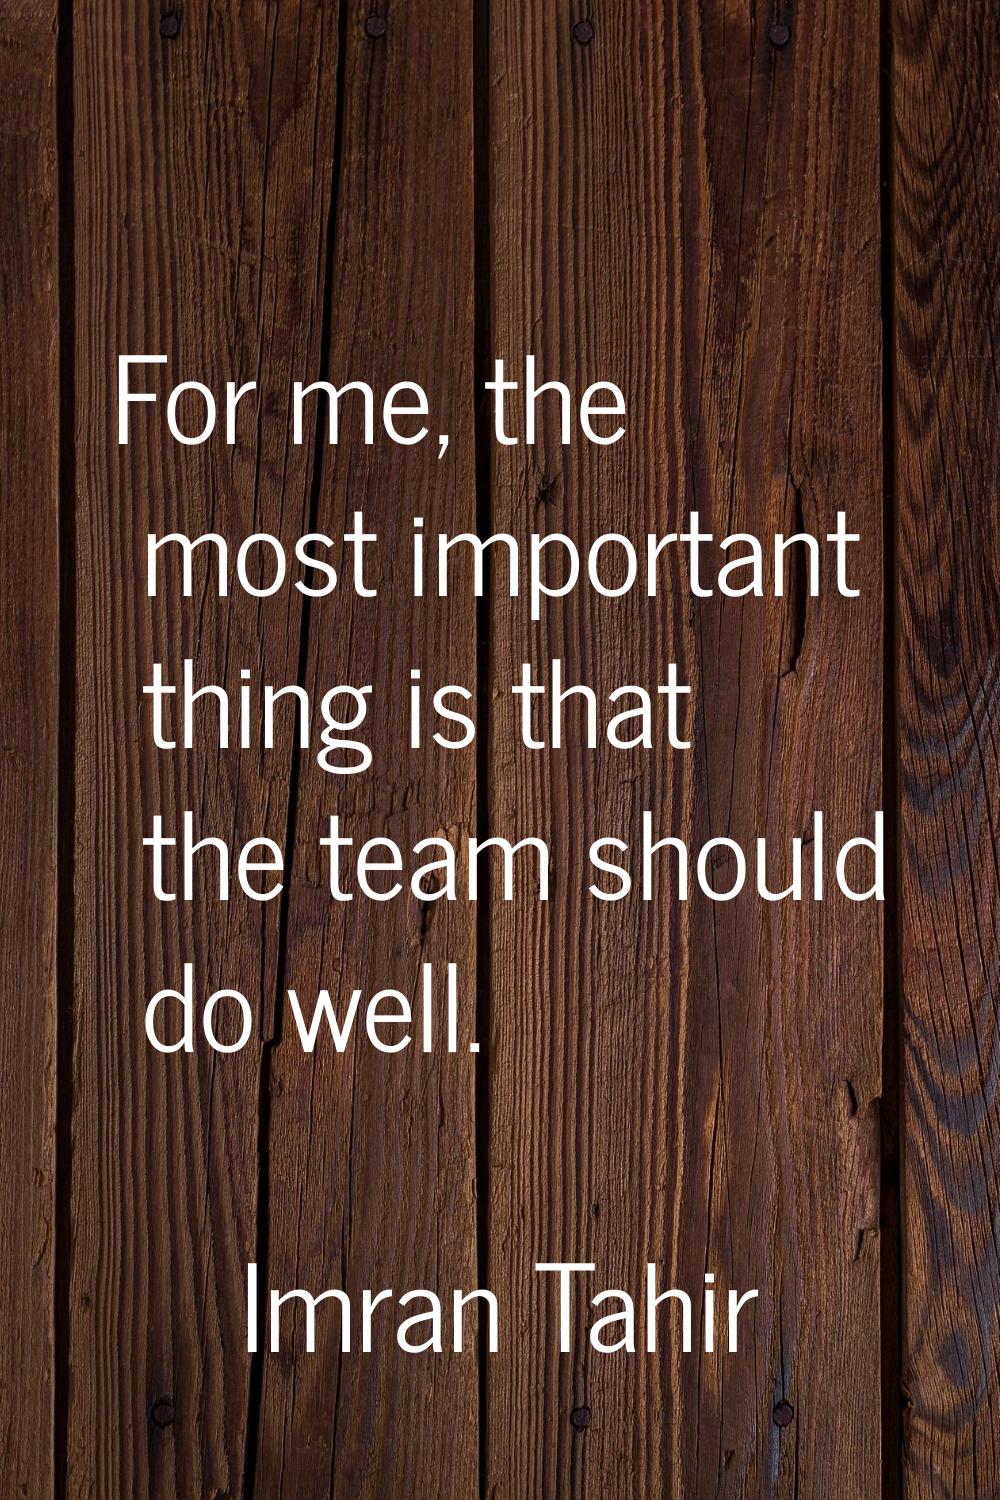 For me, the most important thing is that the team should do well.